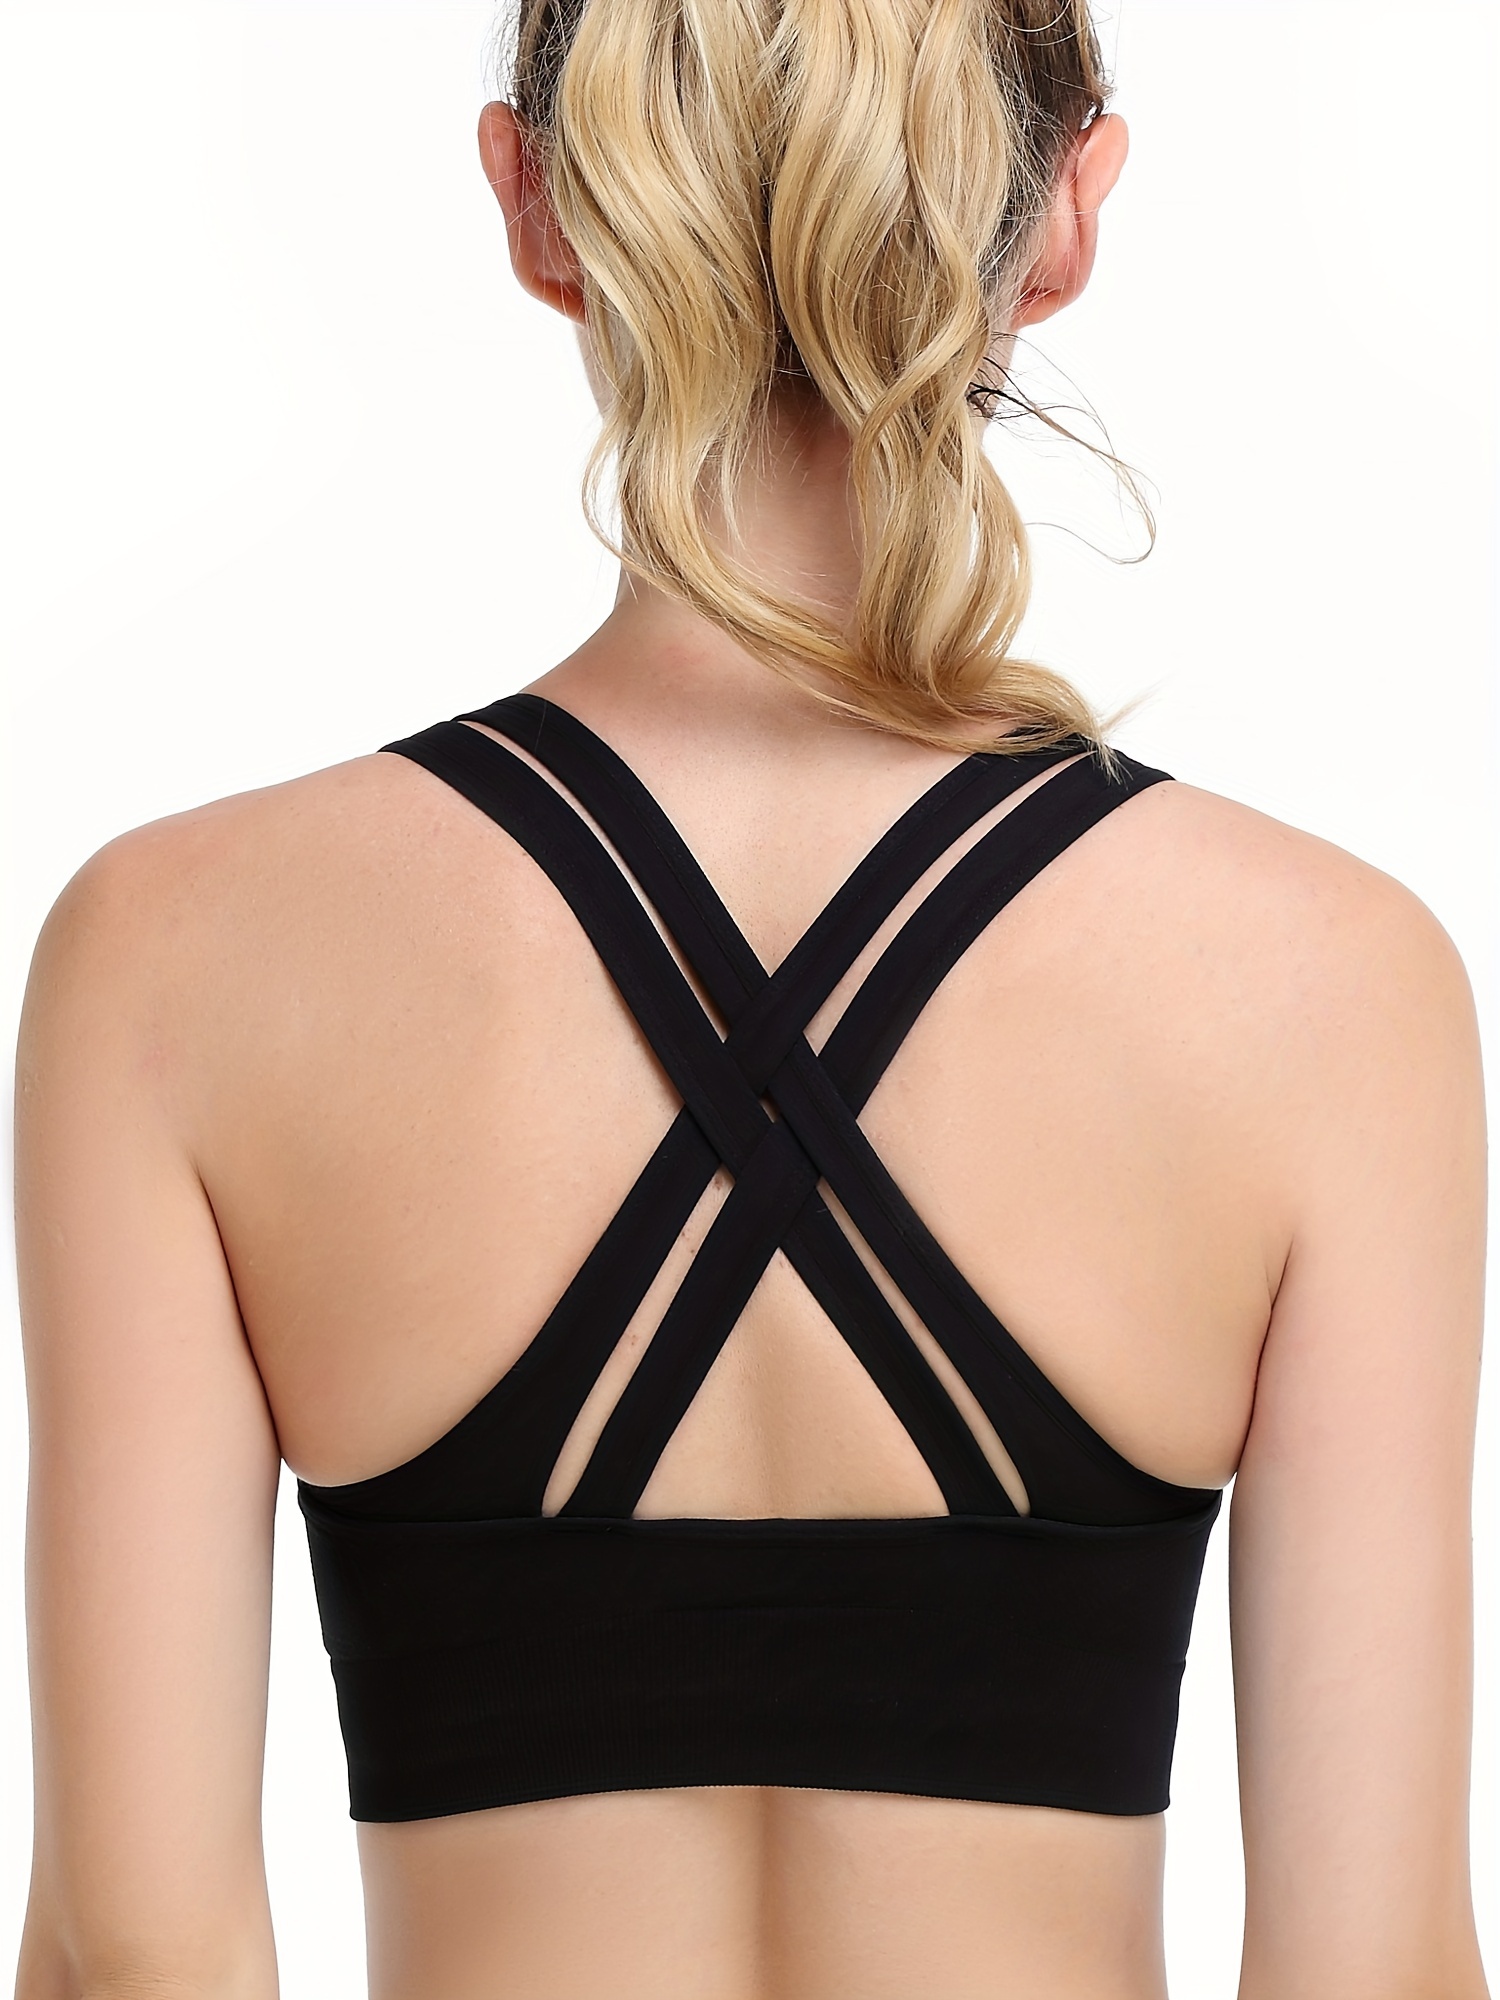 Backless Lace Black Strappy Sports Bra For Women Push Up Crop Top